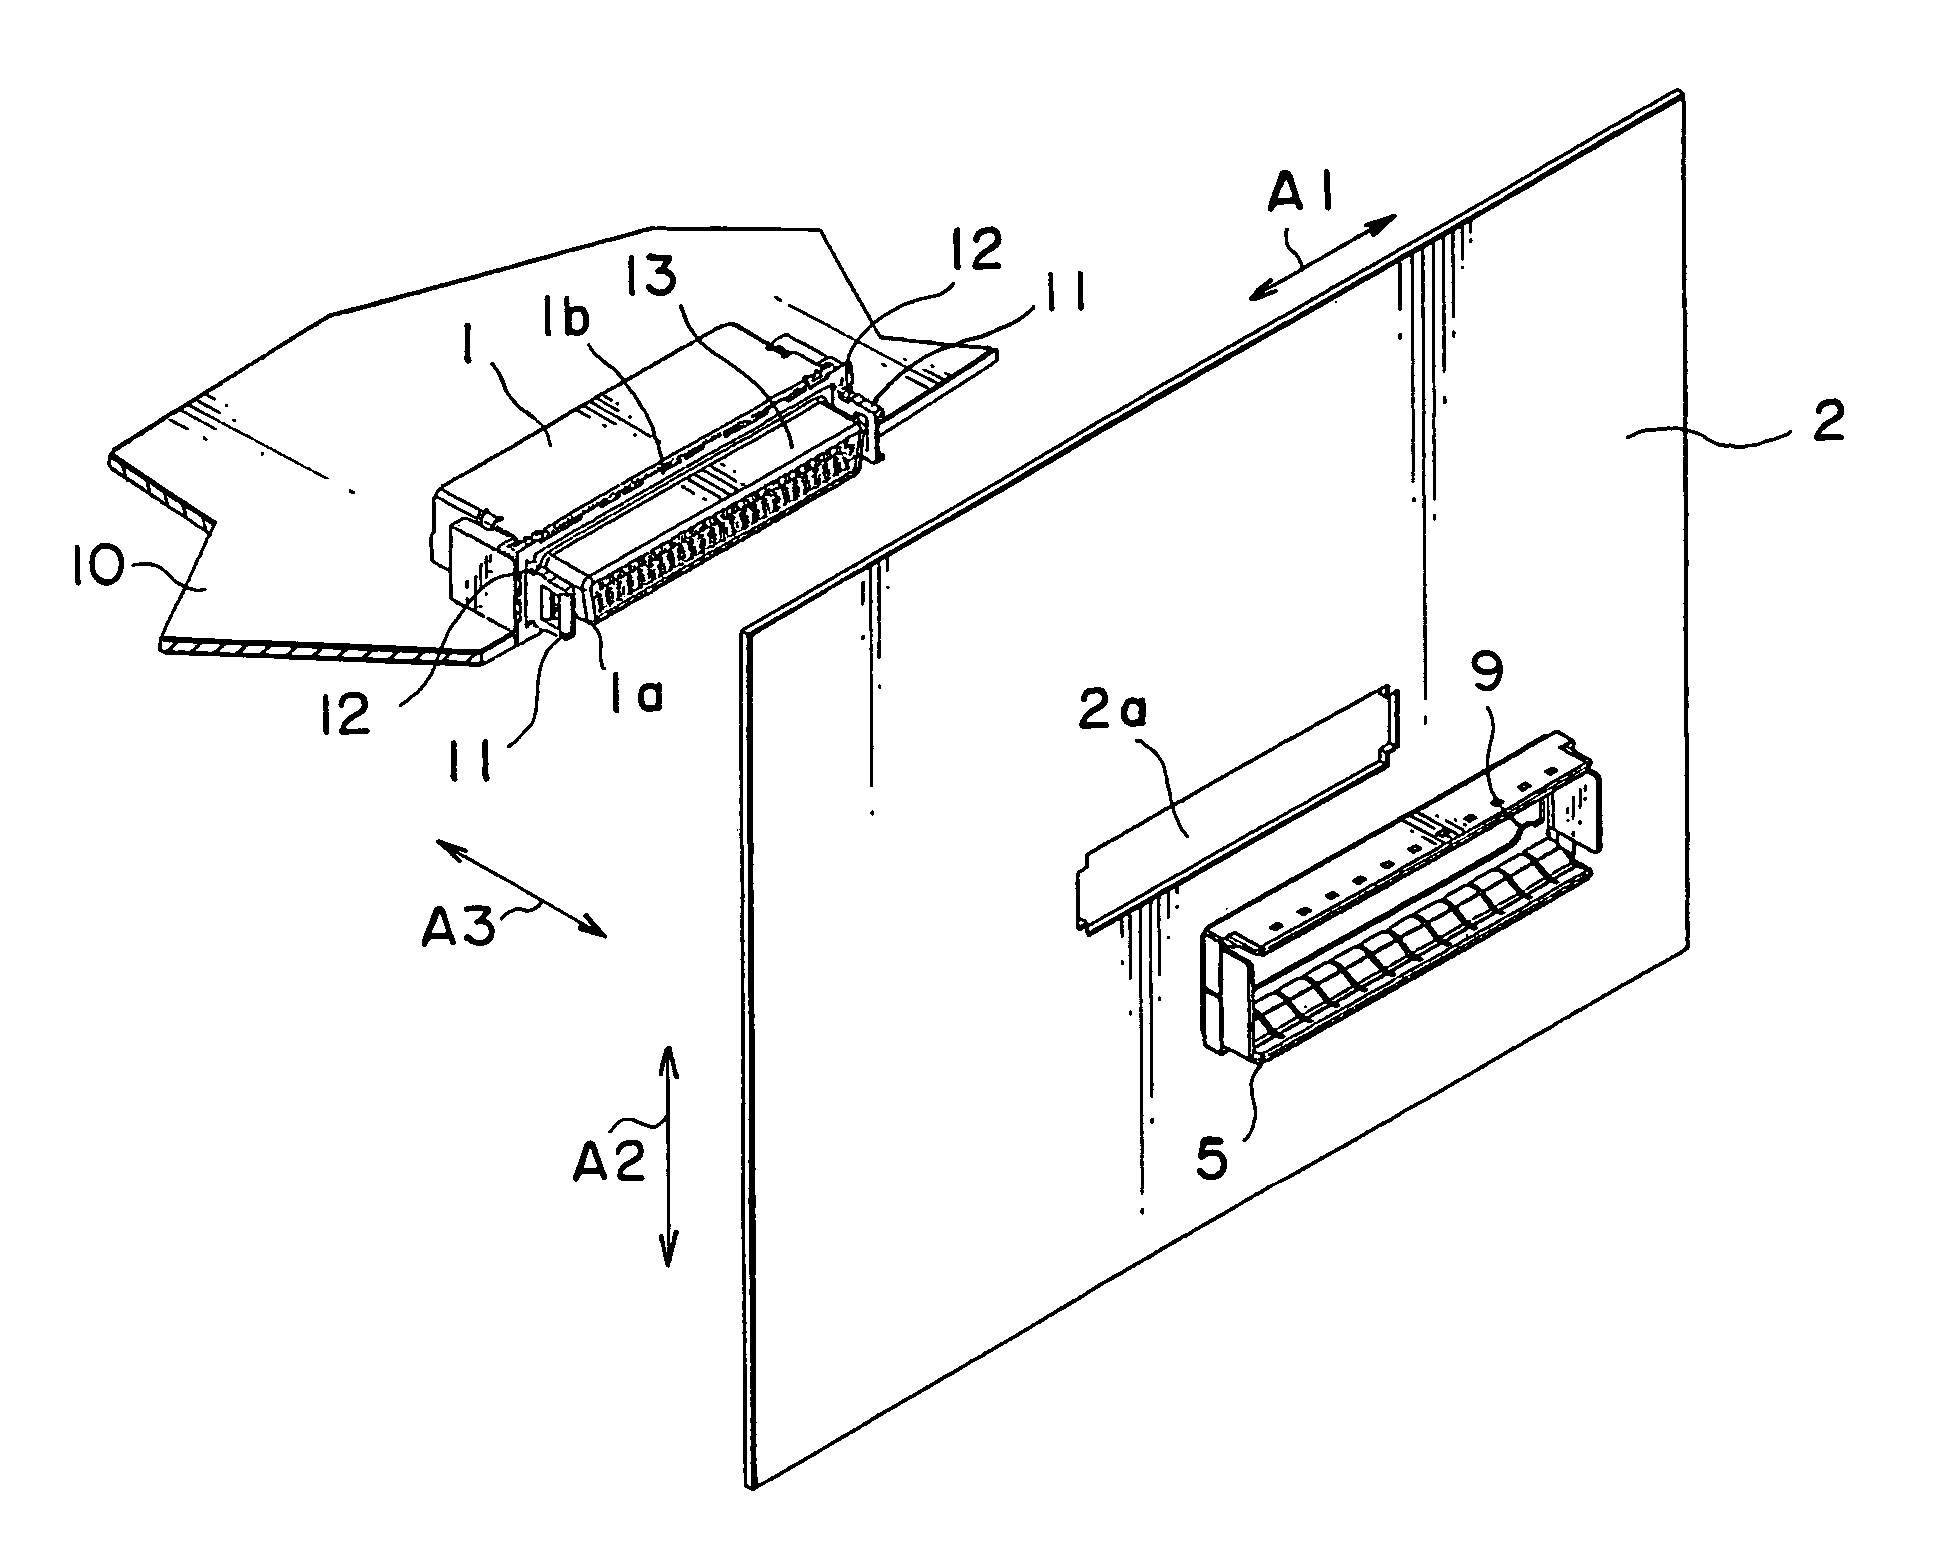 Connector which can easily be mounted to an object and provided with EMI protection